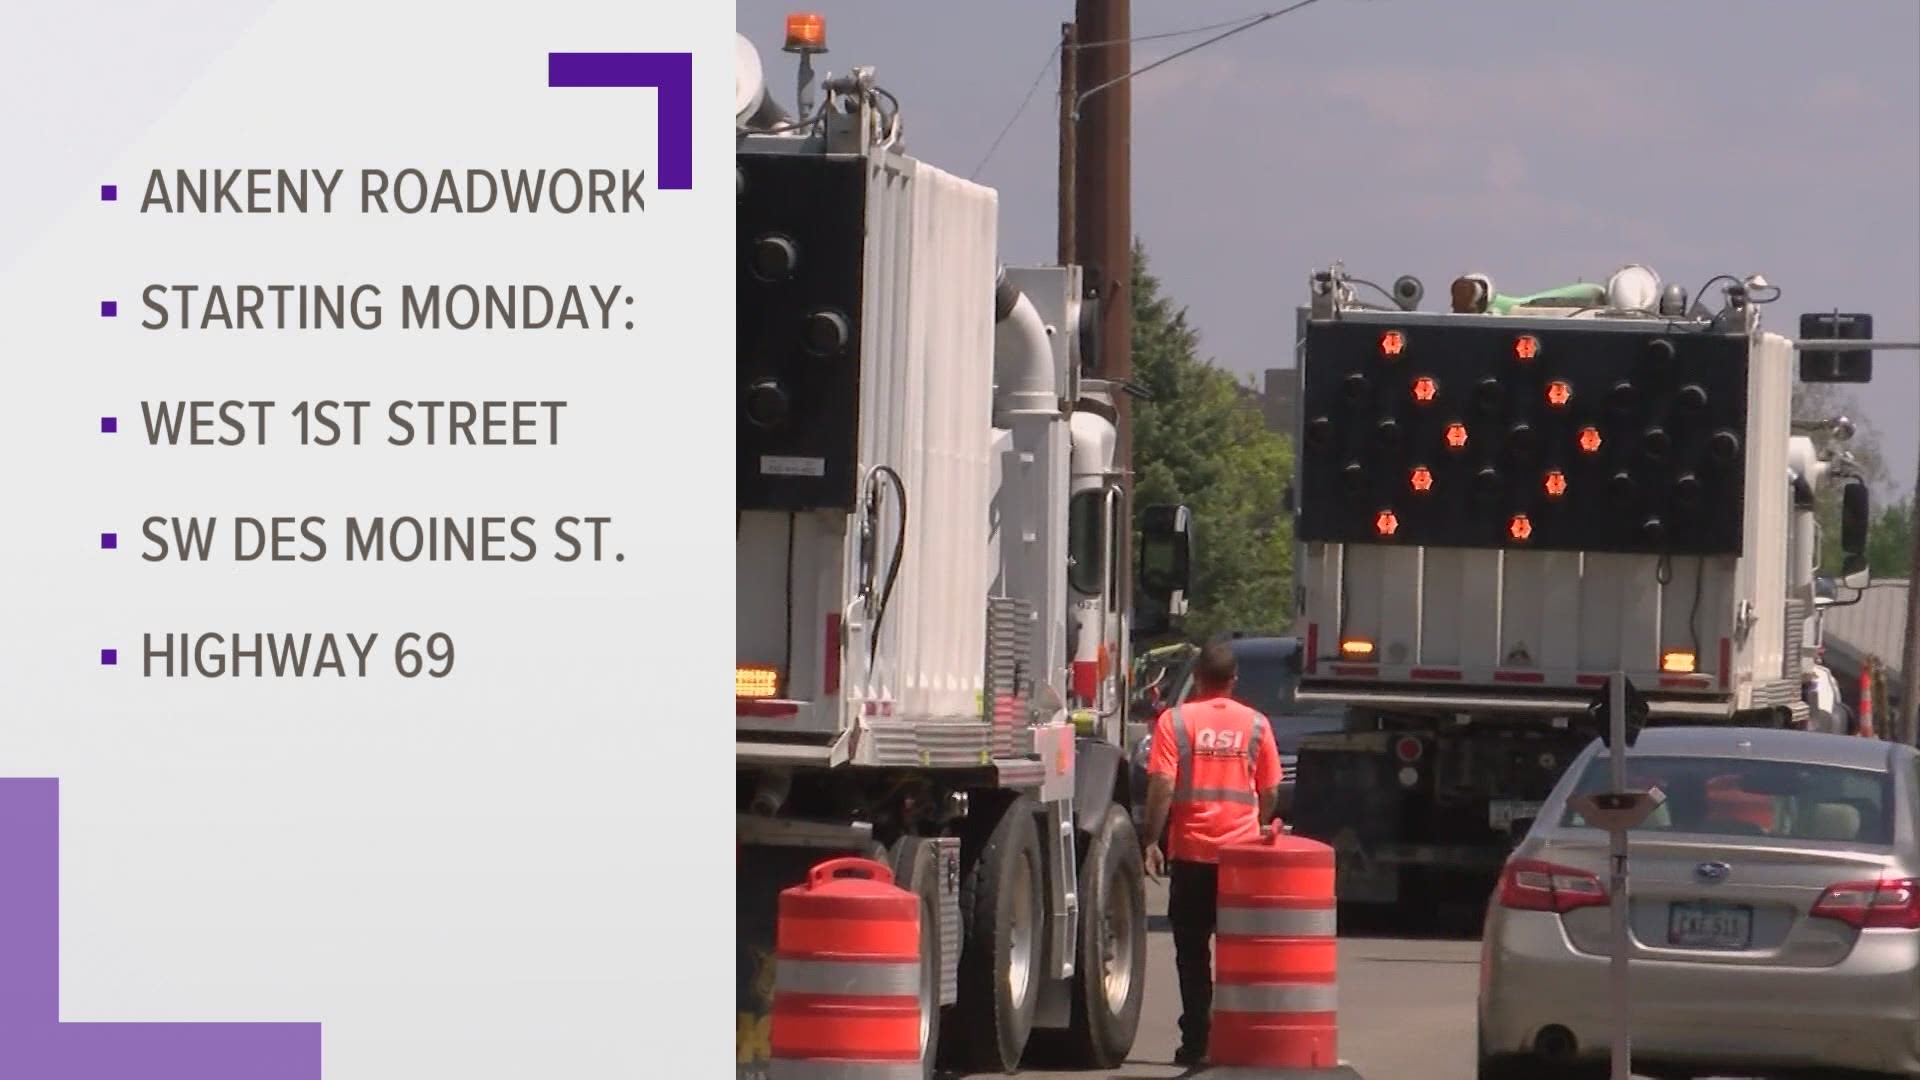 West First Street between SW Des Moines Street and Ankeny Boulevard (Highway 69) will be limited to one lane in each direction.